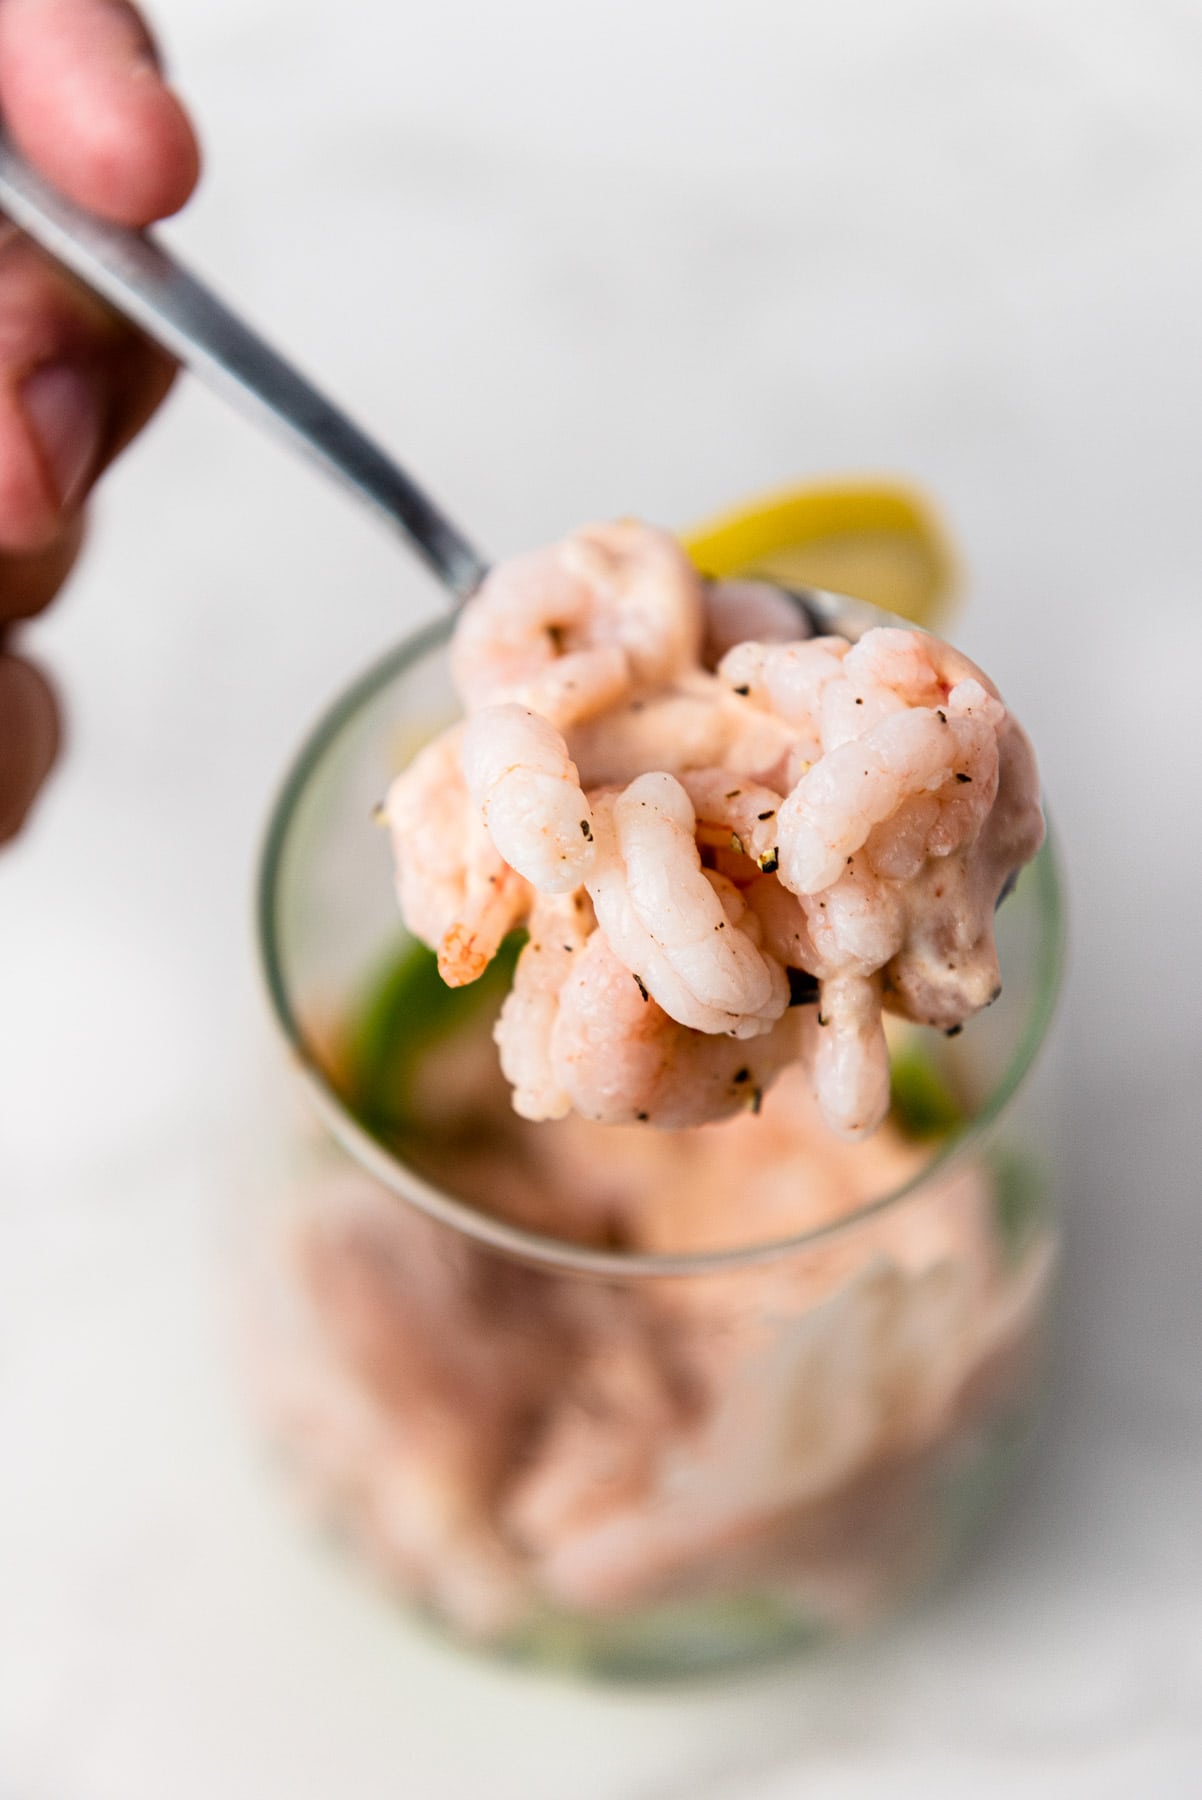 hand holding spoon lifting cooked shrimp and dressing out of serving glass.